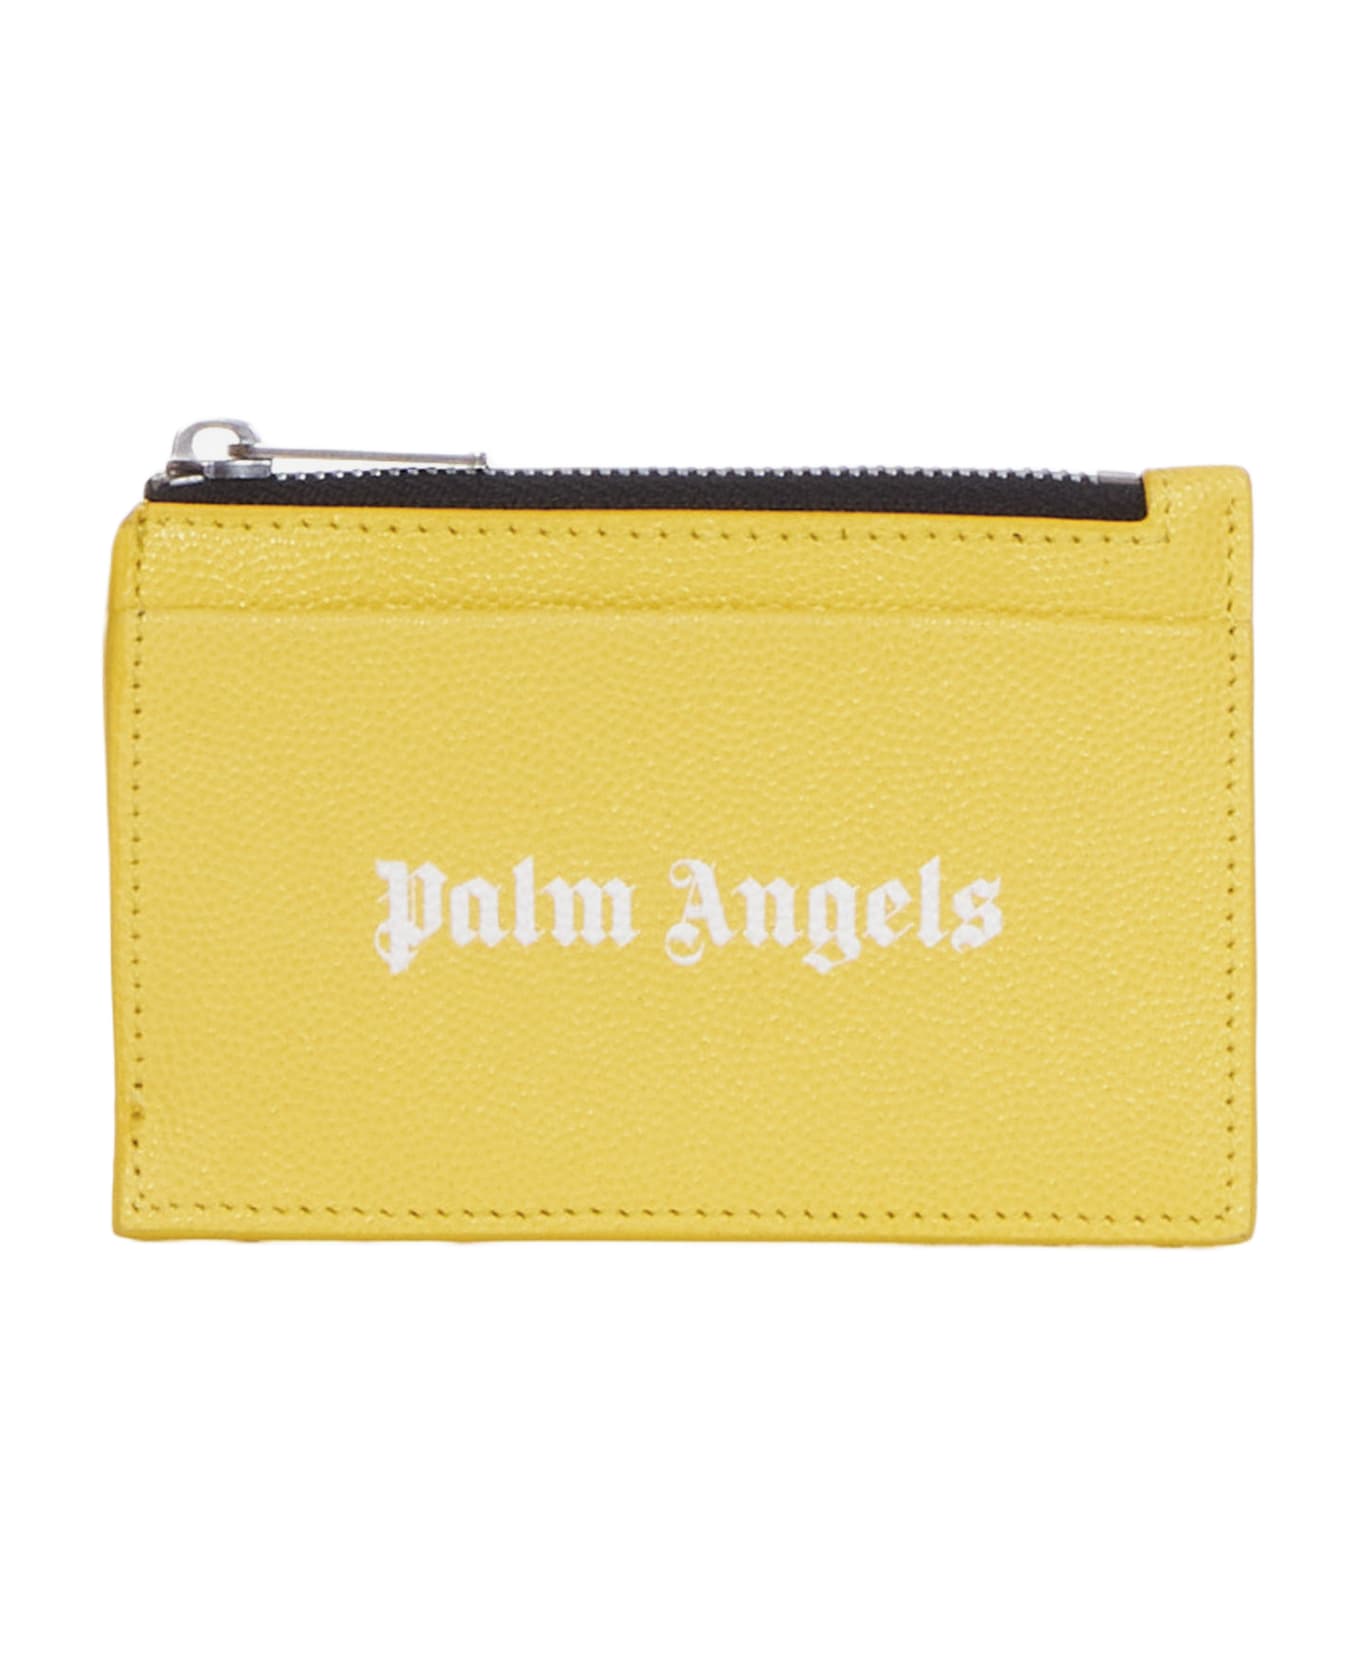 Palm Angels Cardholder - Giallo